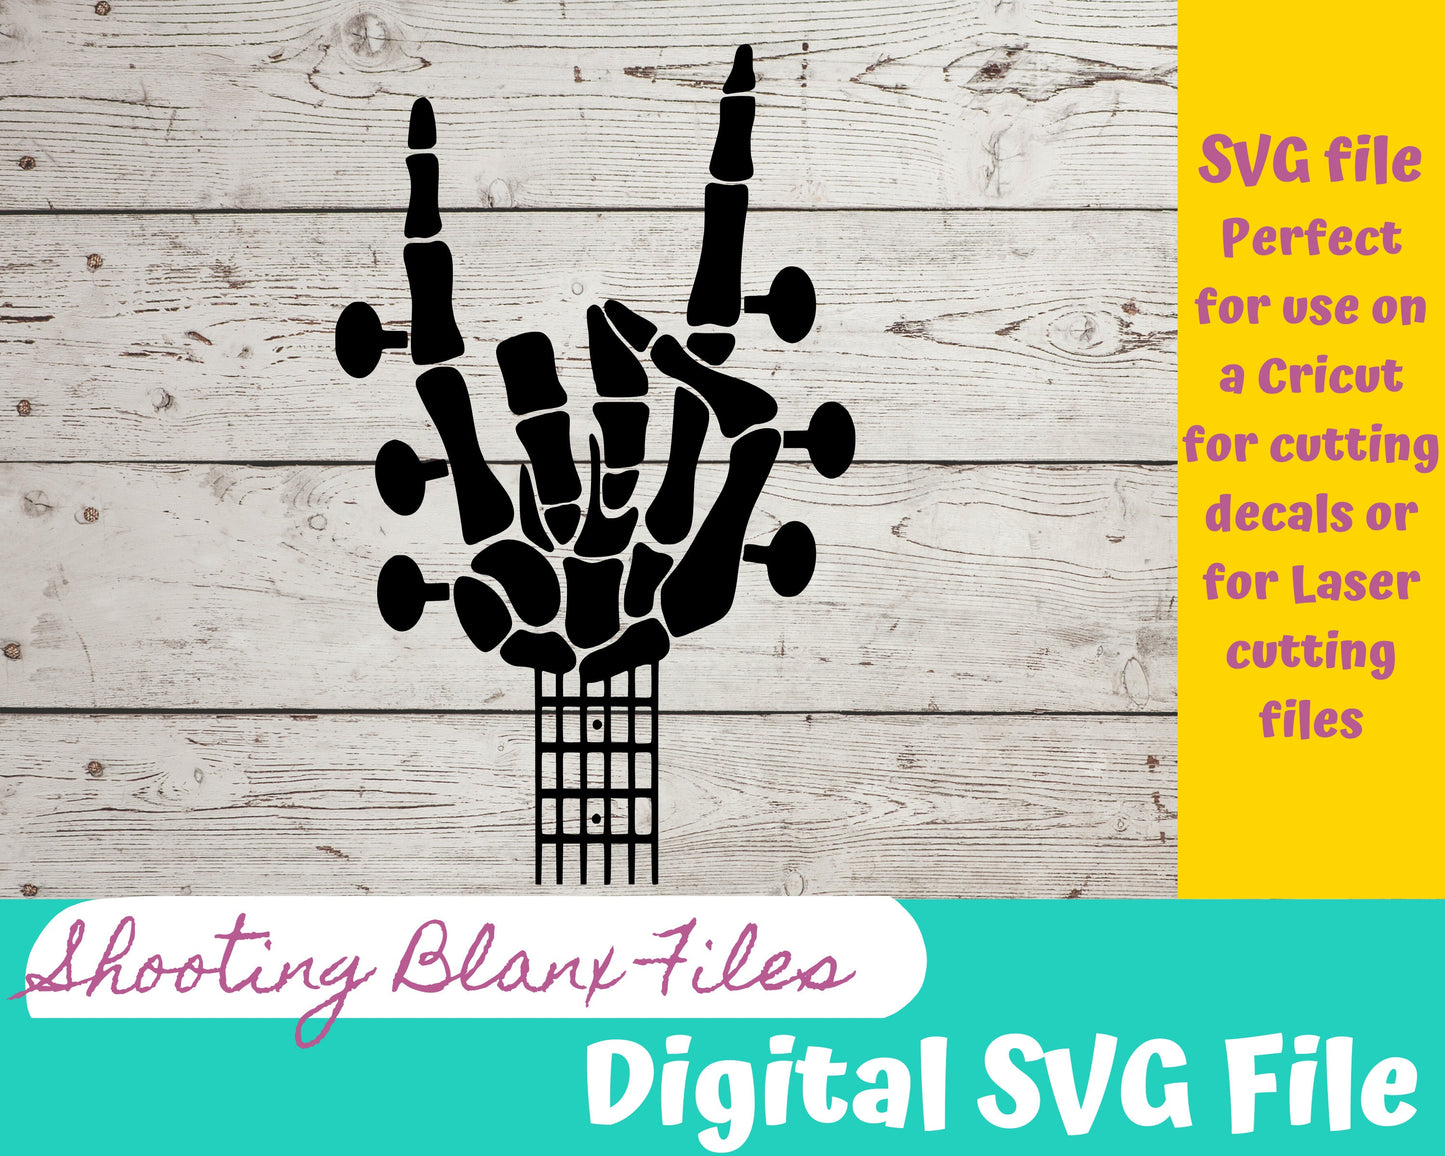 Guitar Skeleton SVG file perfect for Cricut, Cameo, or Silhouette also for laser engraving Glowforge, Scary, Halloween, Horror, Rock on